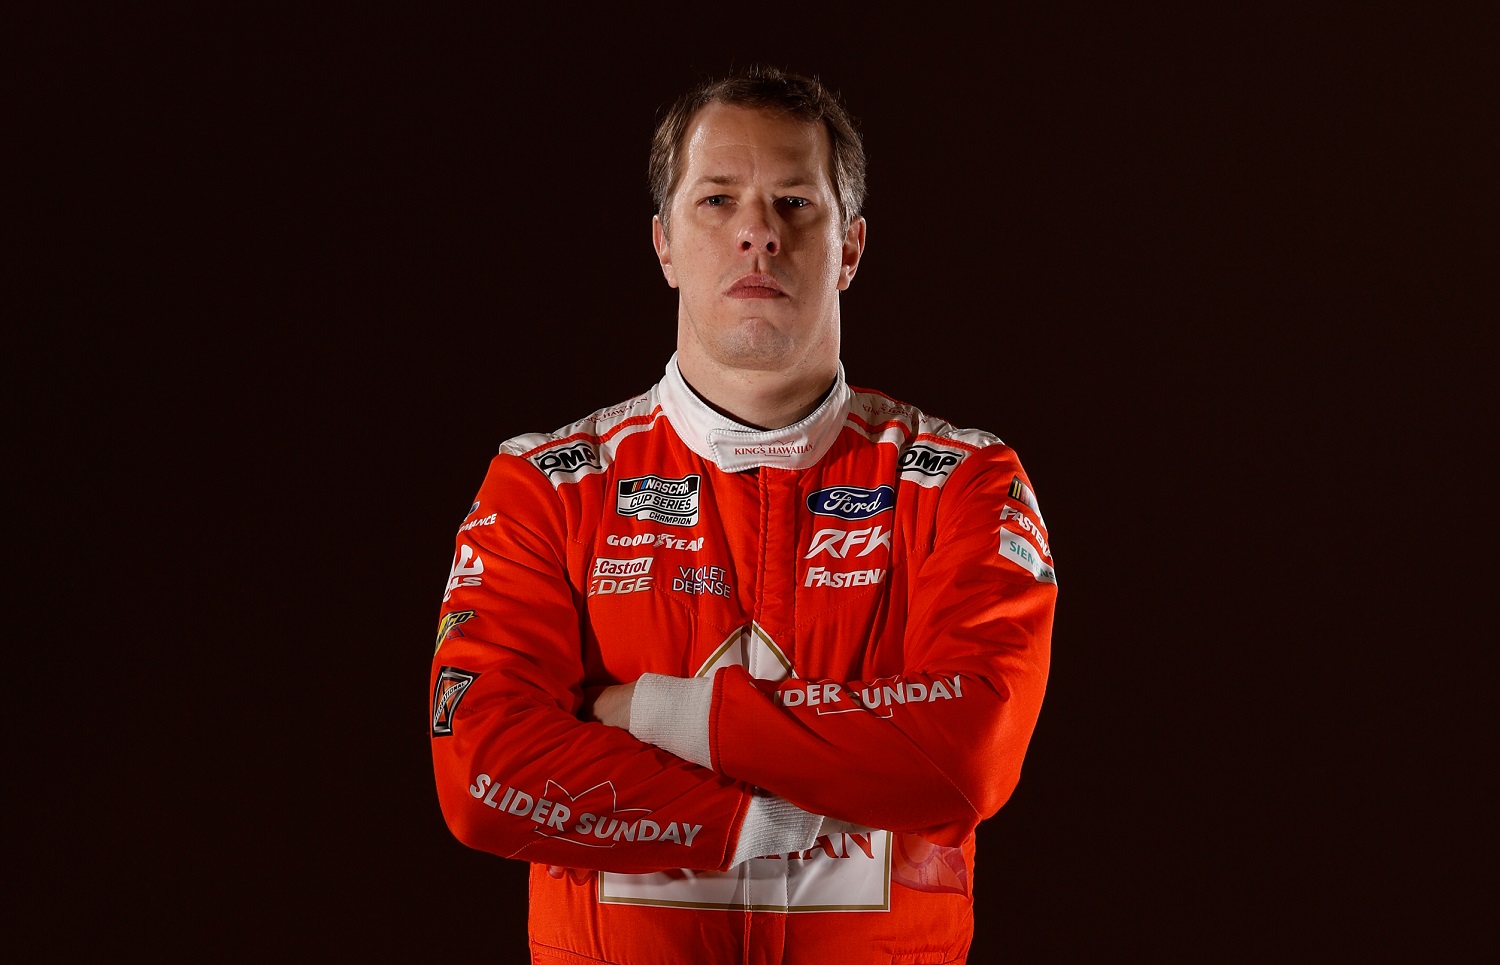 NASCAR driver Brad Keselowski poses for a photo during NASCAR Production Days at Charlotte Convention Center on Jan. 18, 2023.